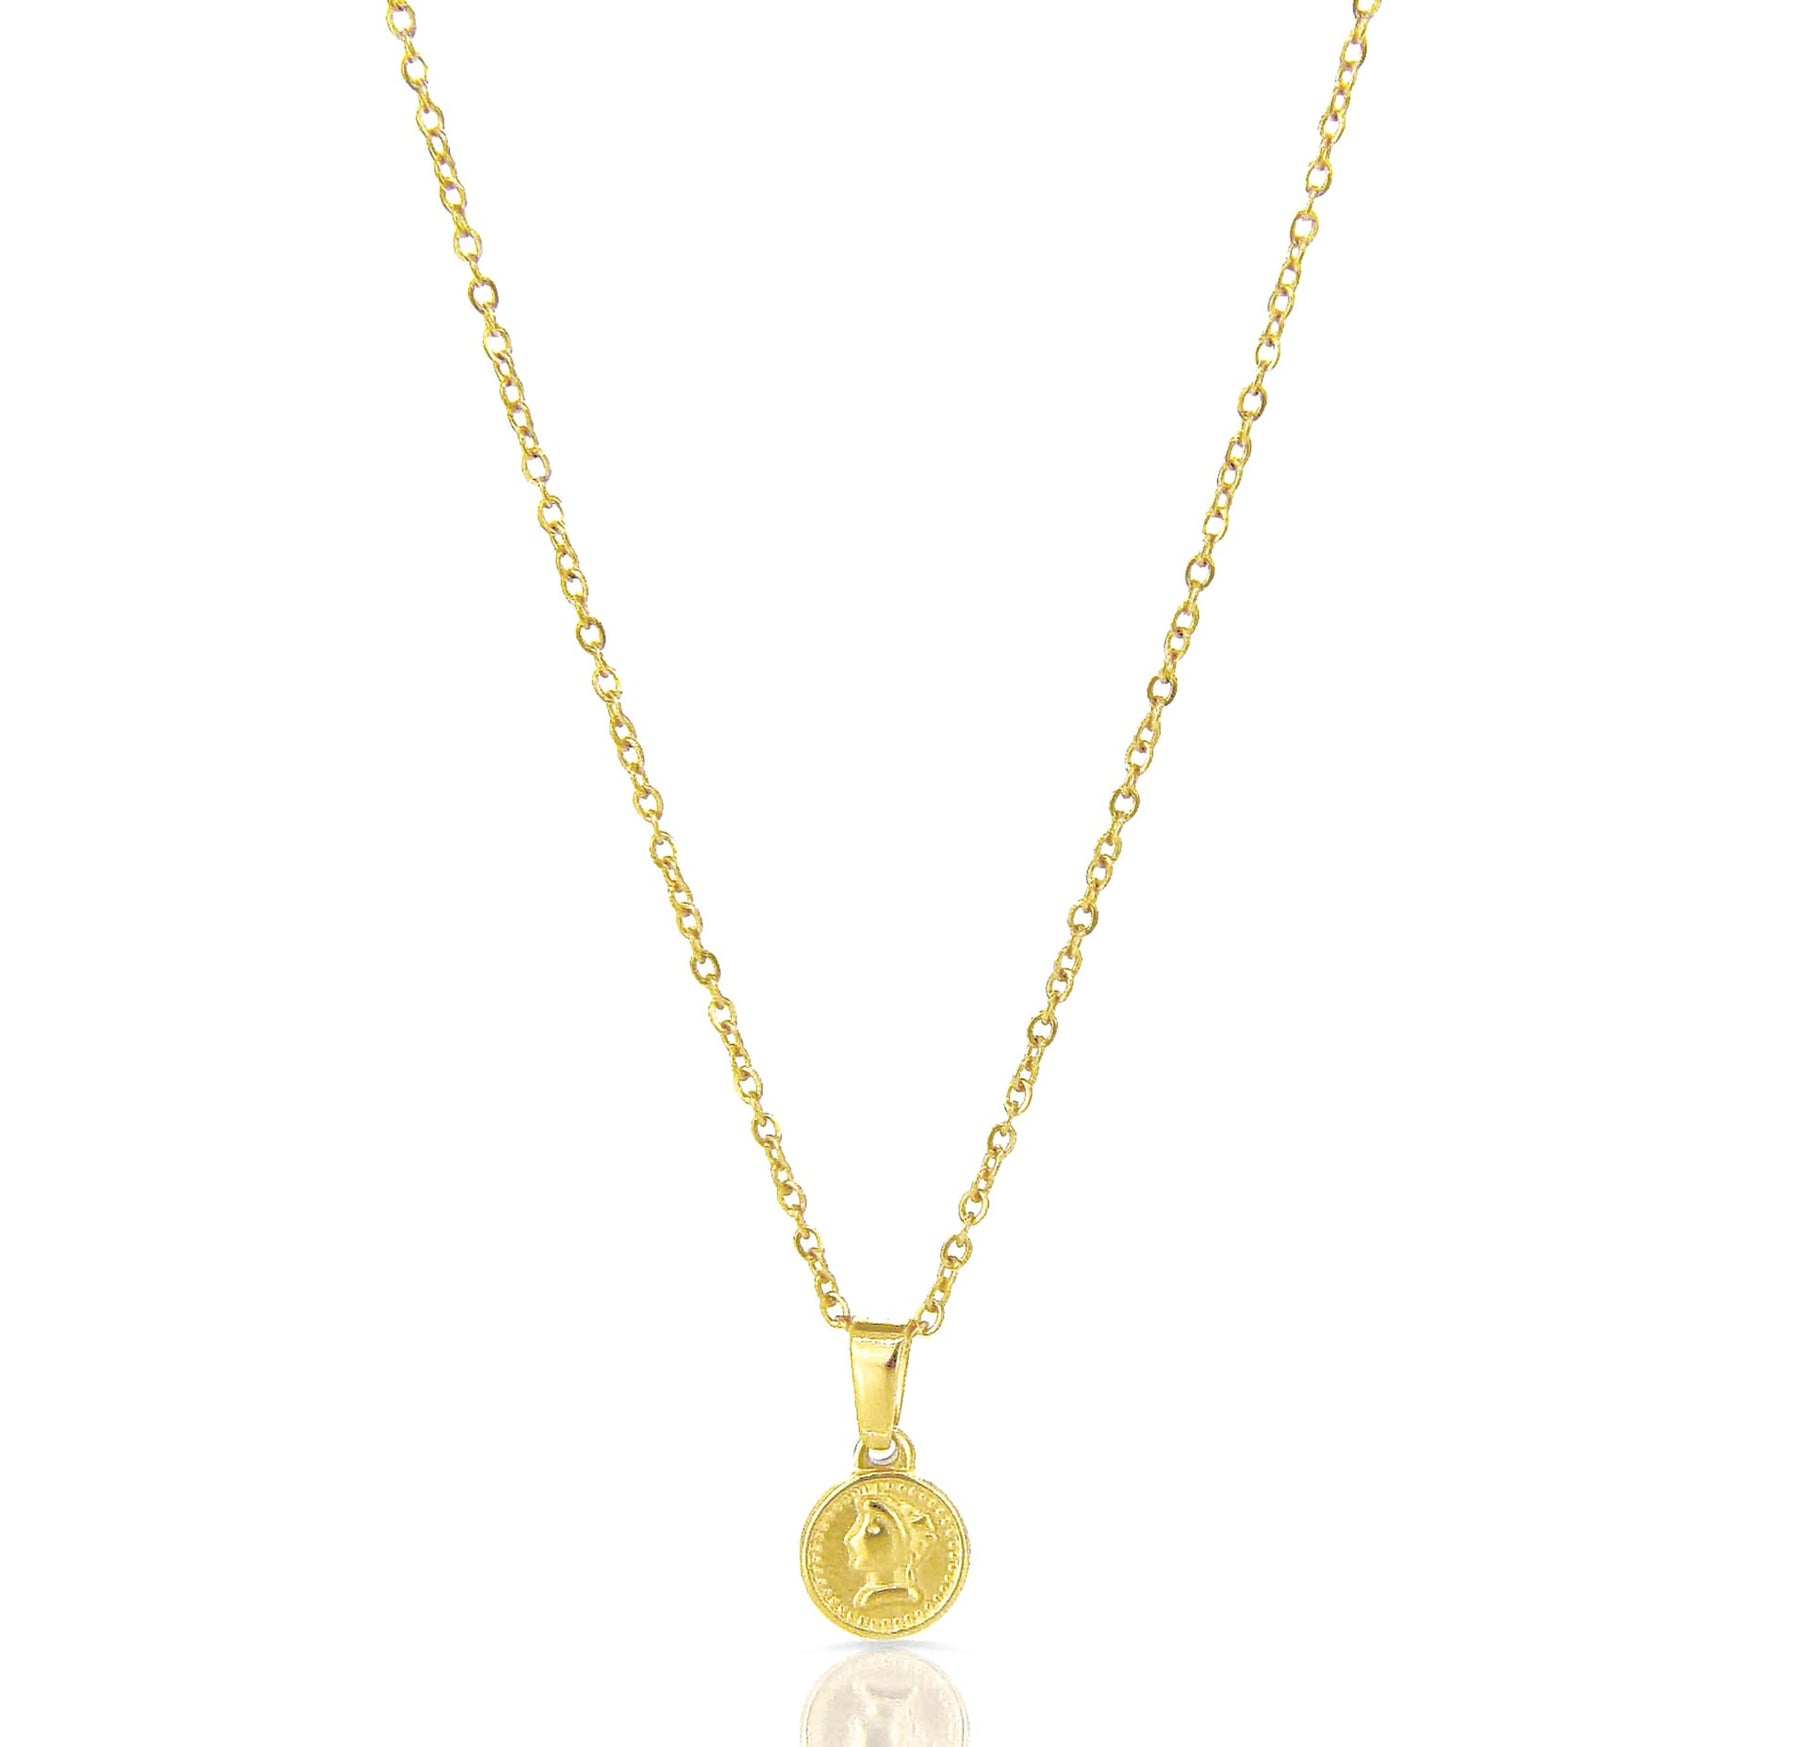 Bella Small Gold Coin Necklace - Waterproof Jewelry